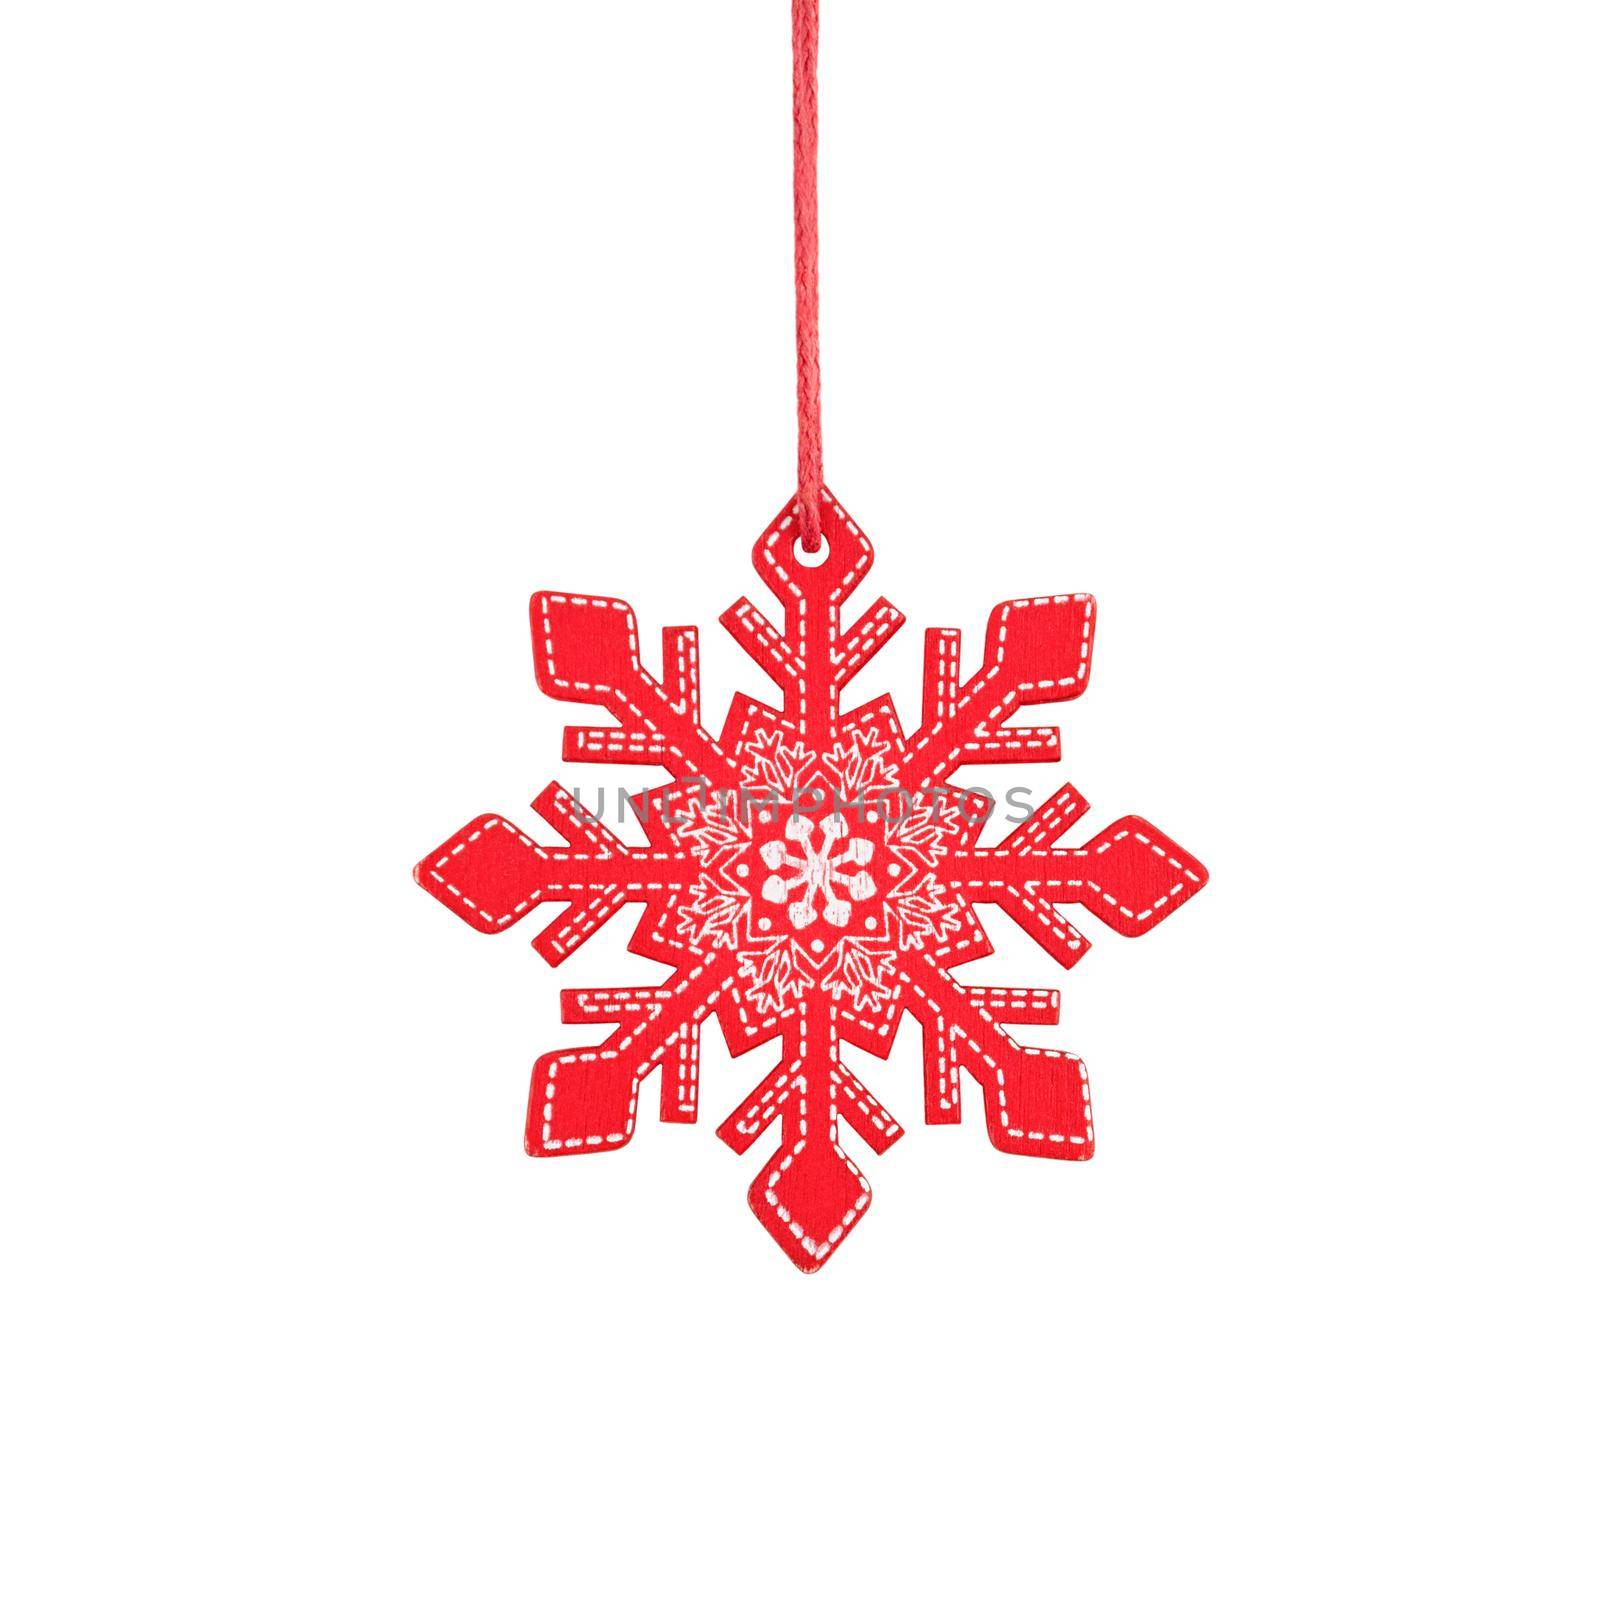 Hanging red wooden snowflake, rustic Christmas tree ornament isolated on a white background.